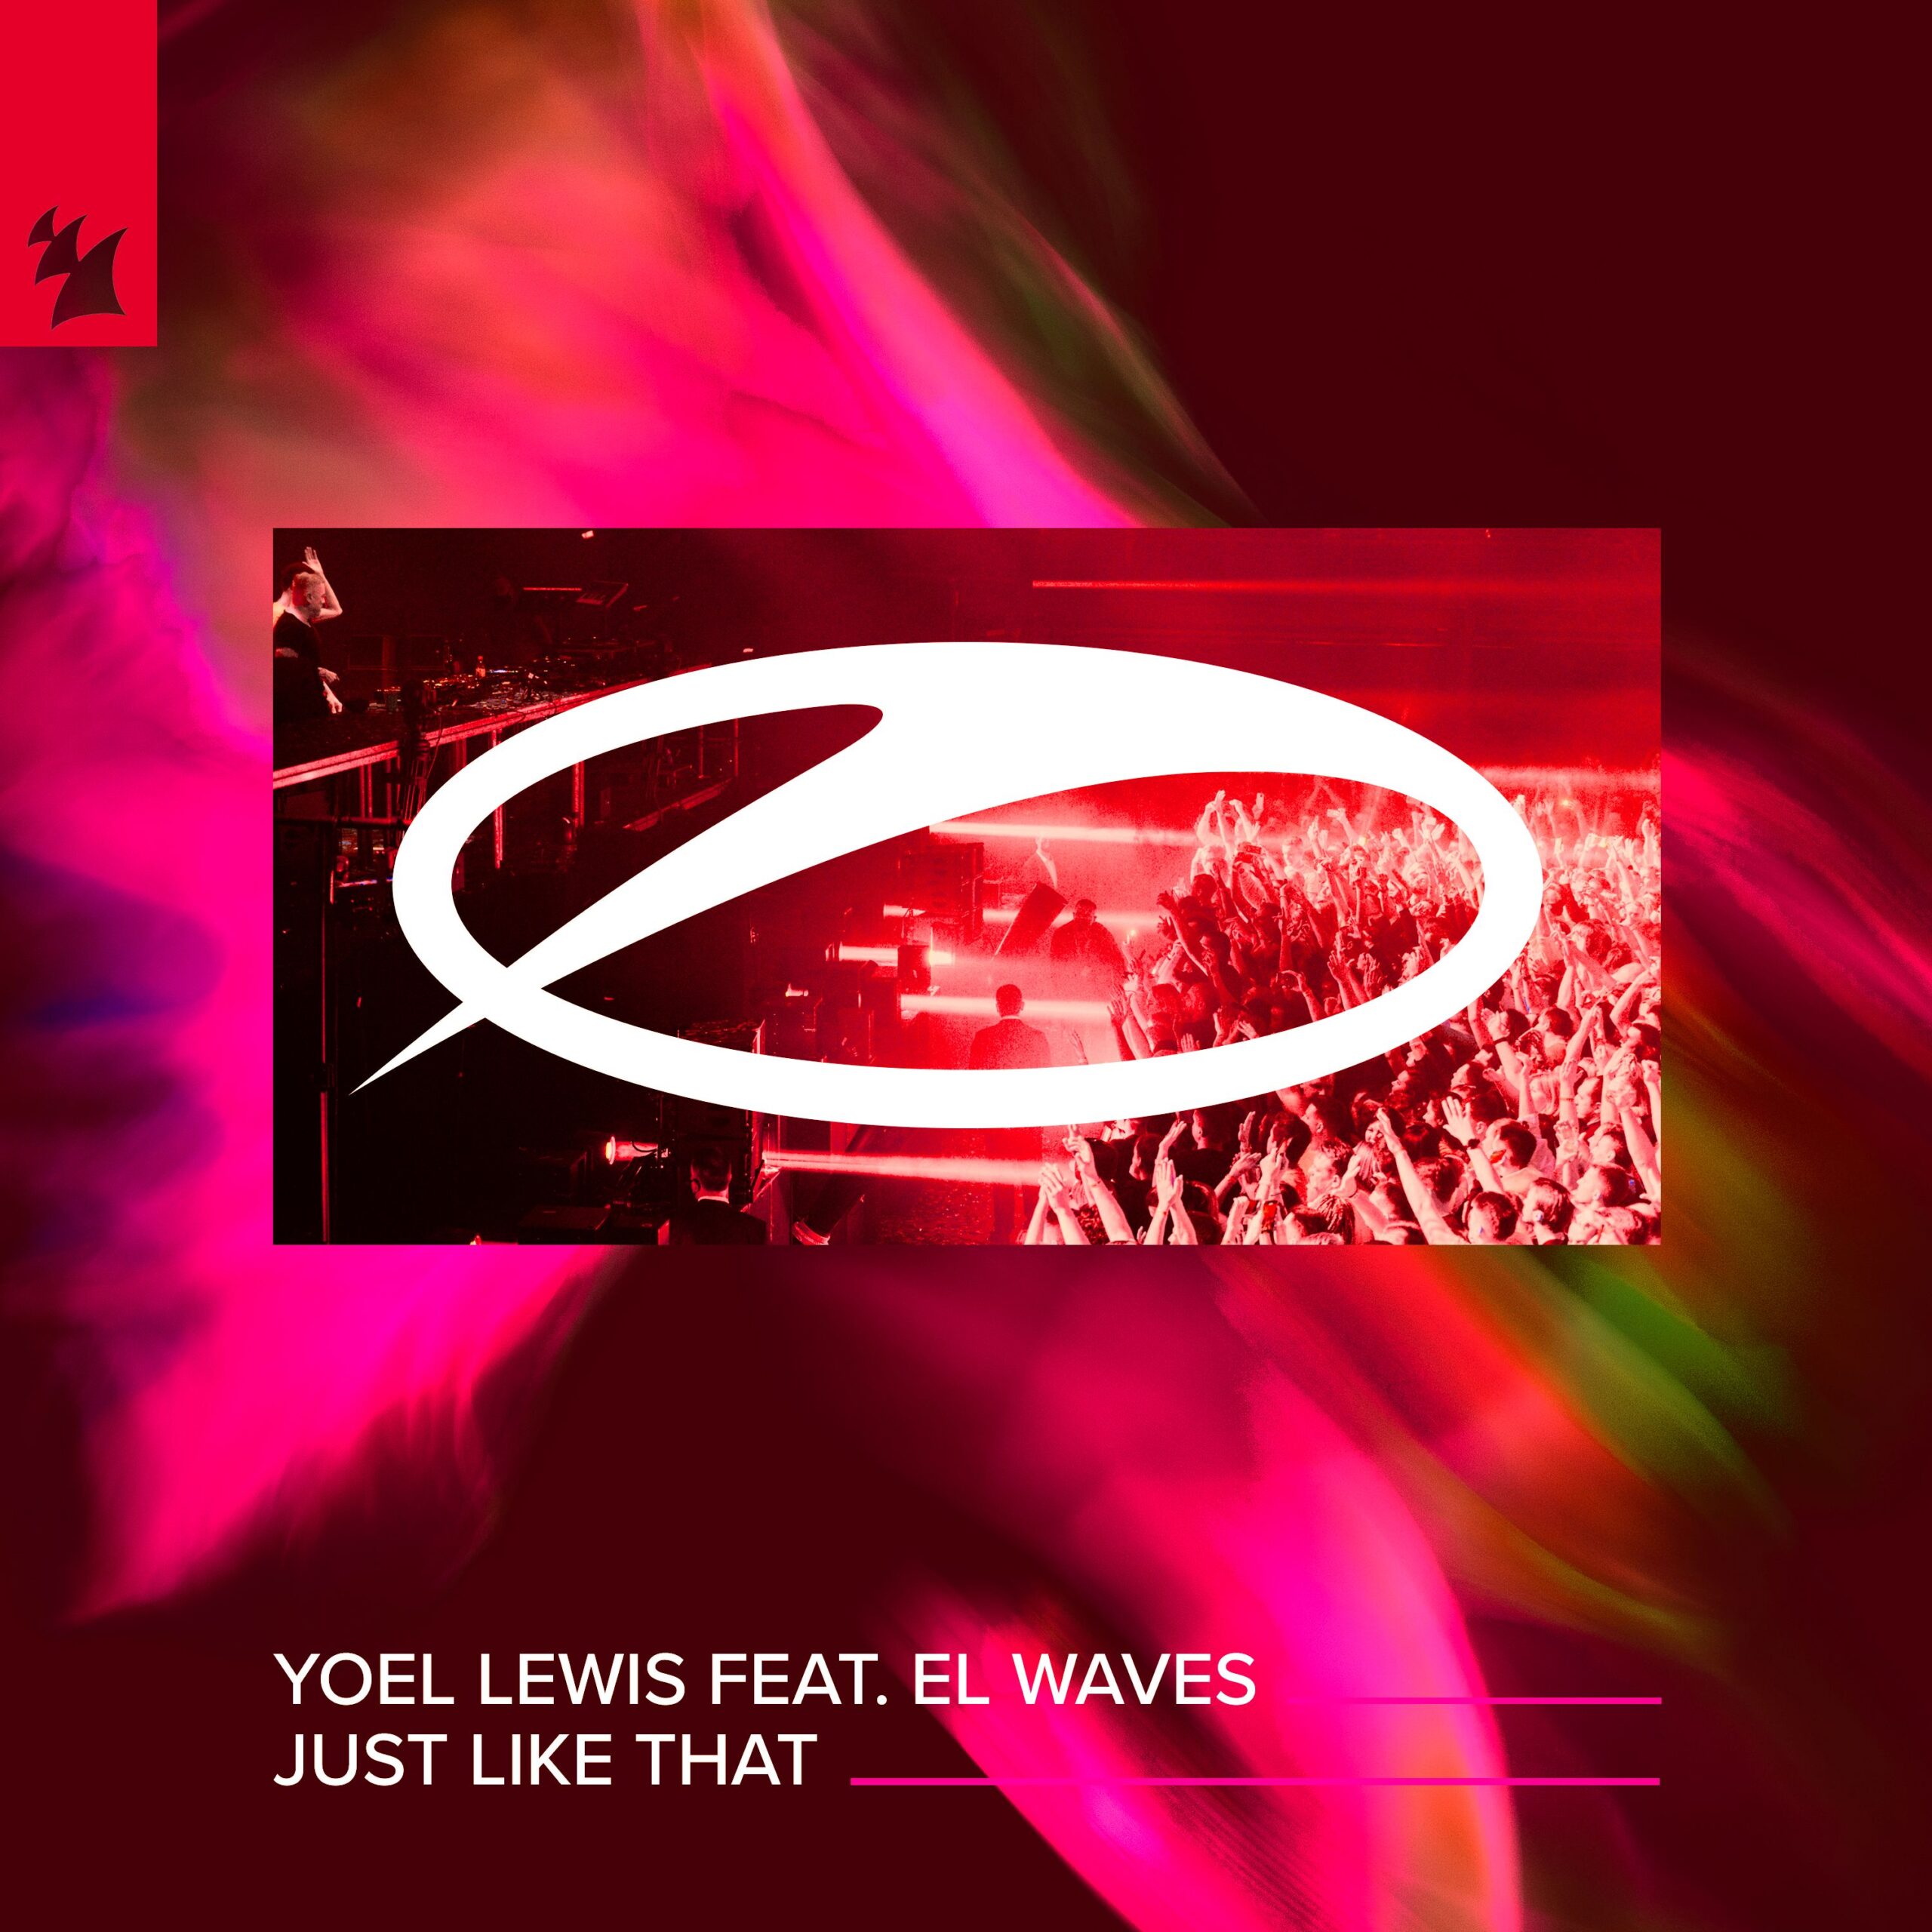 Yoel Lewis feat. EL Waves presents Just Like That on A State Of Trance